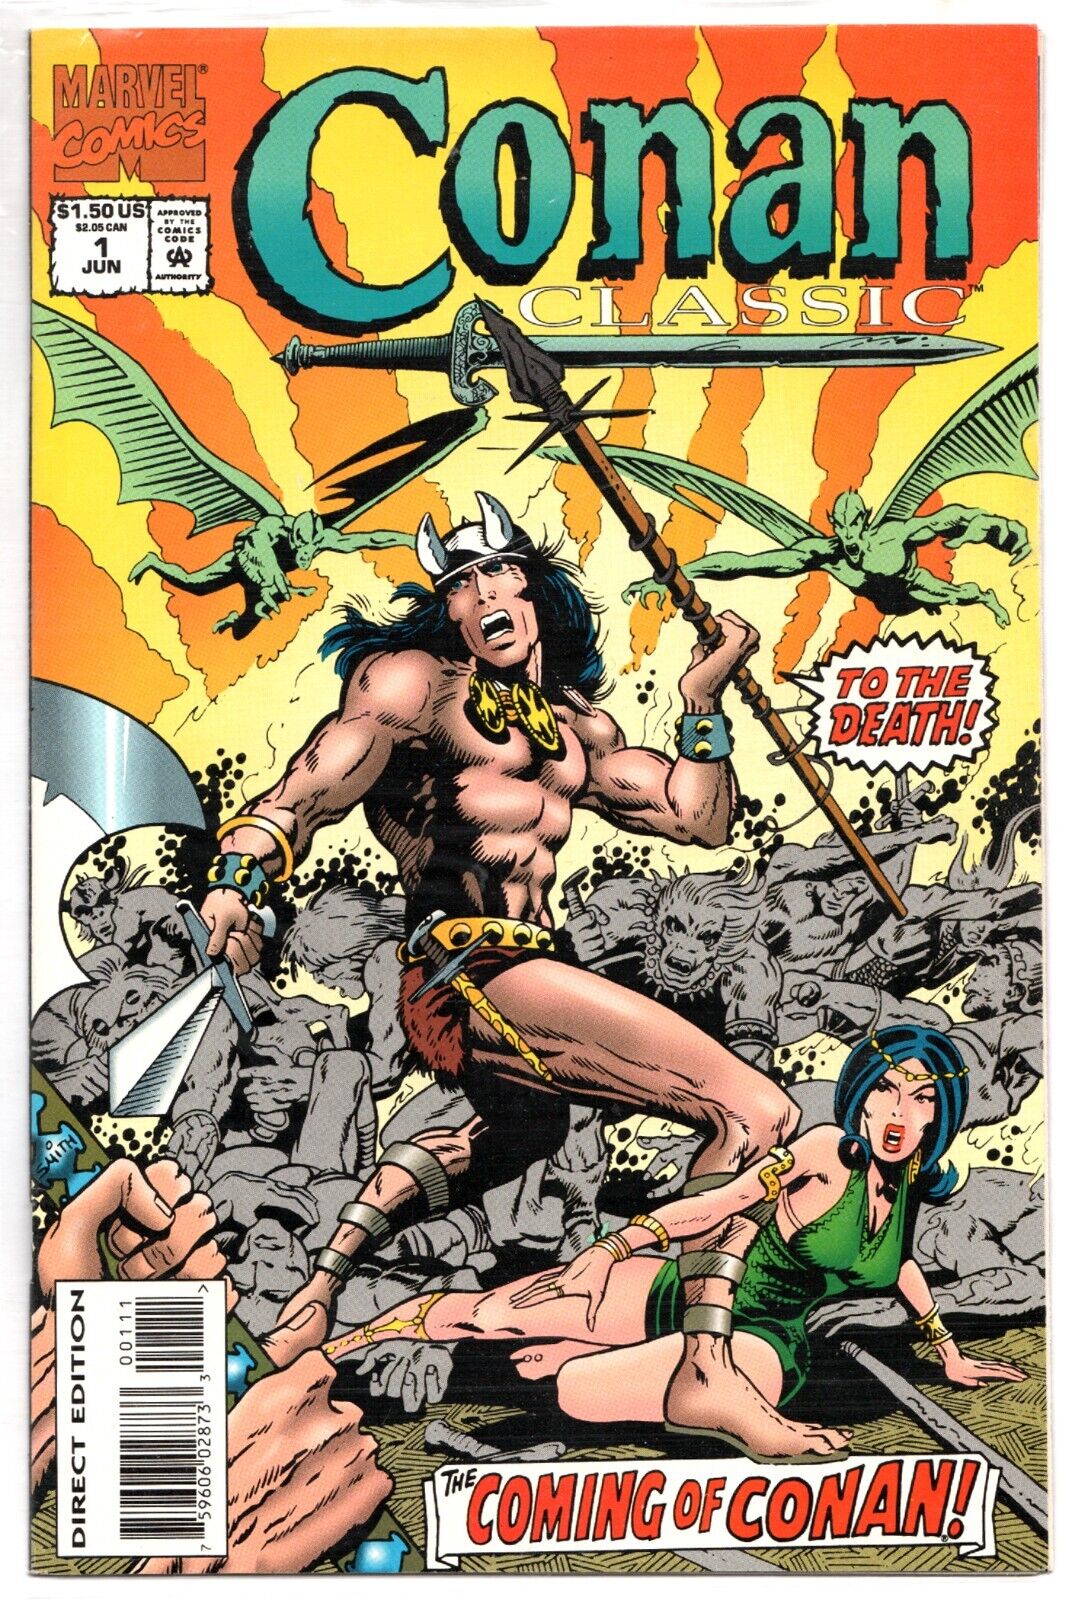 Conan Classic #1-11 (MARVEL1994) Complete Set - re-mastered